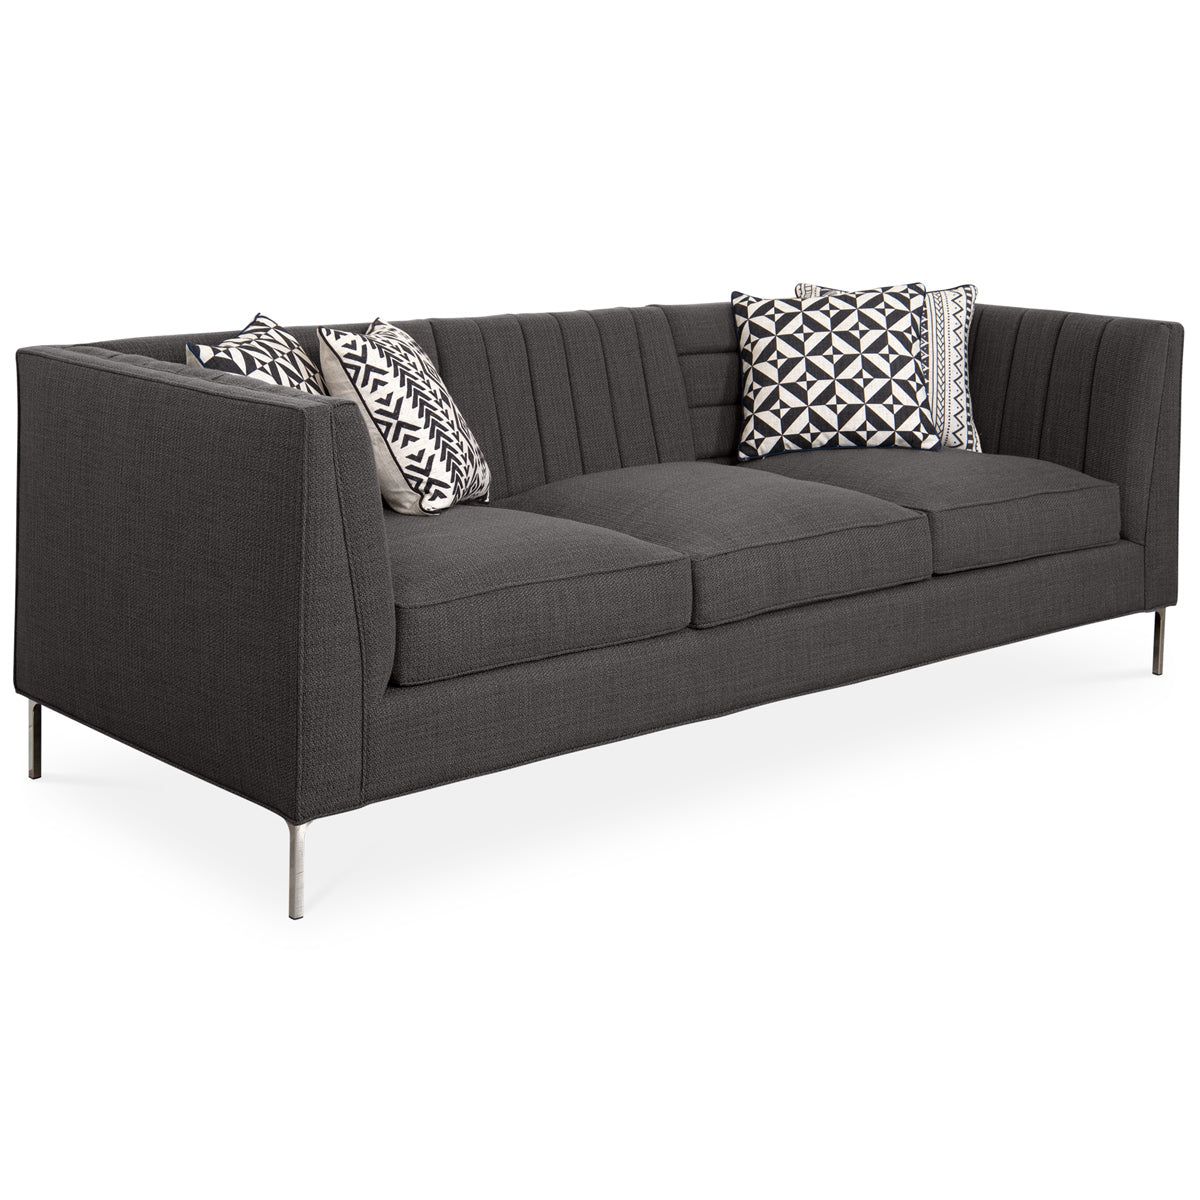 Capri Sofa In Charcoal Linen – Modshop With Light Charcoal Linen Sofas (View 10 of 20)